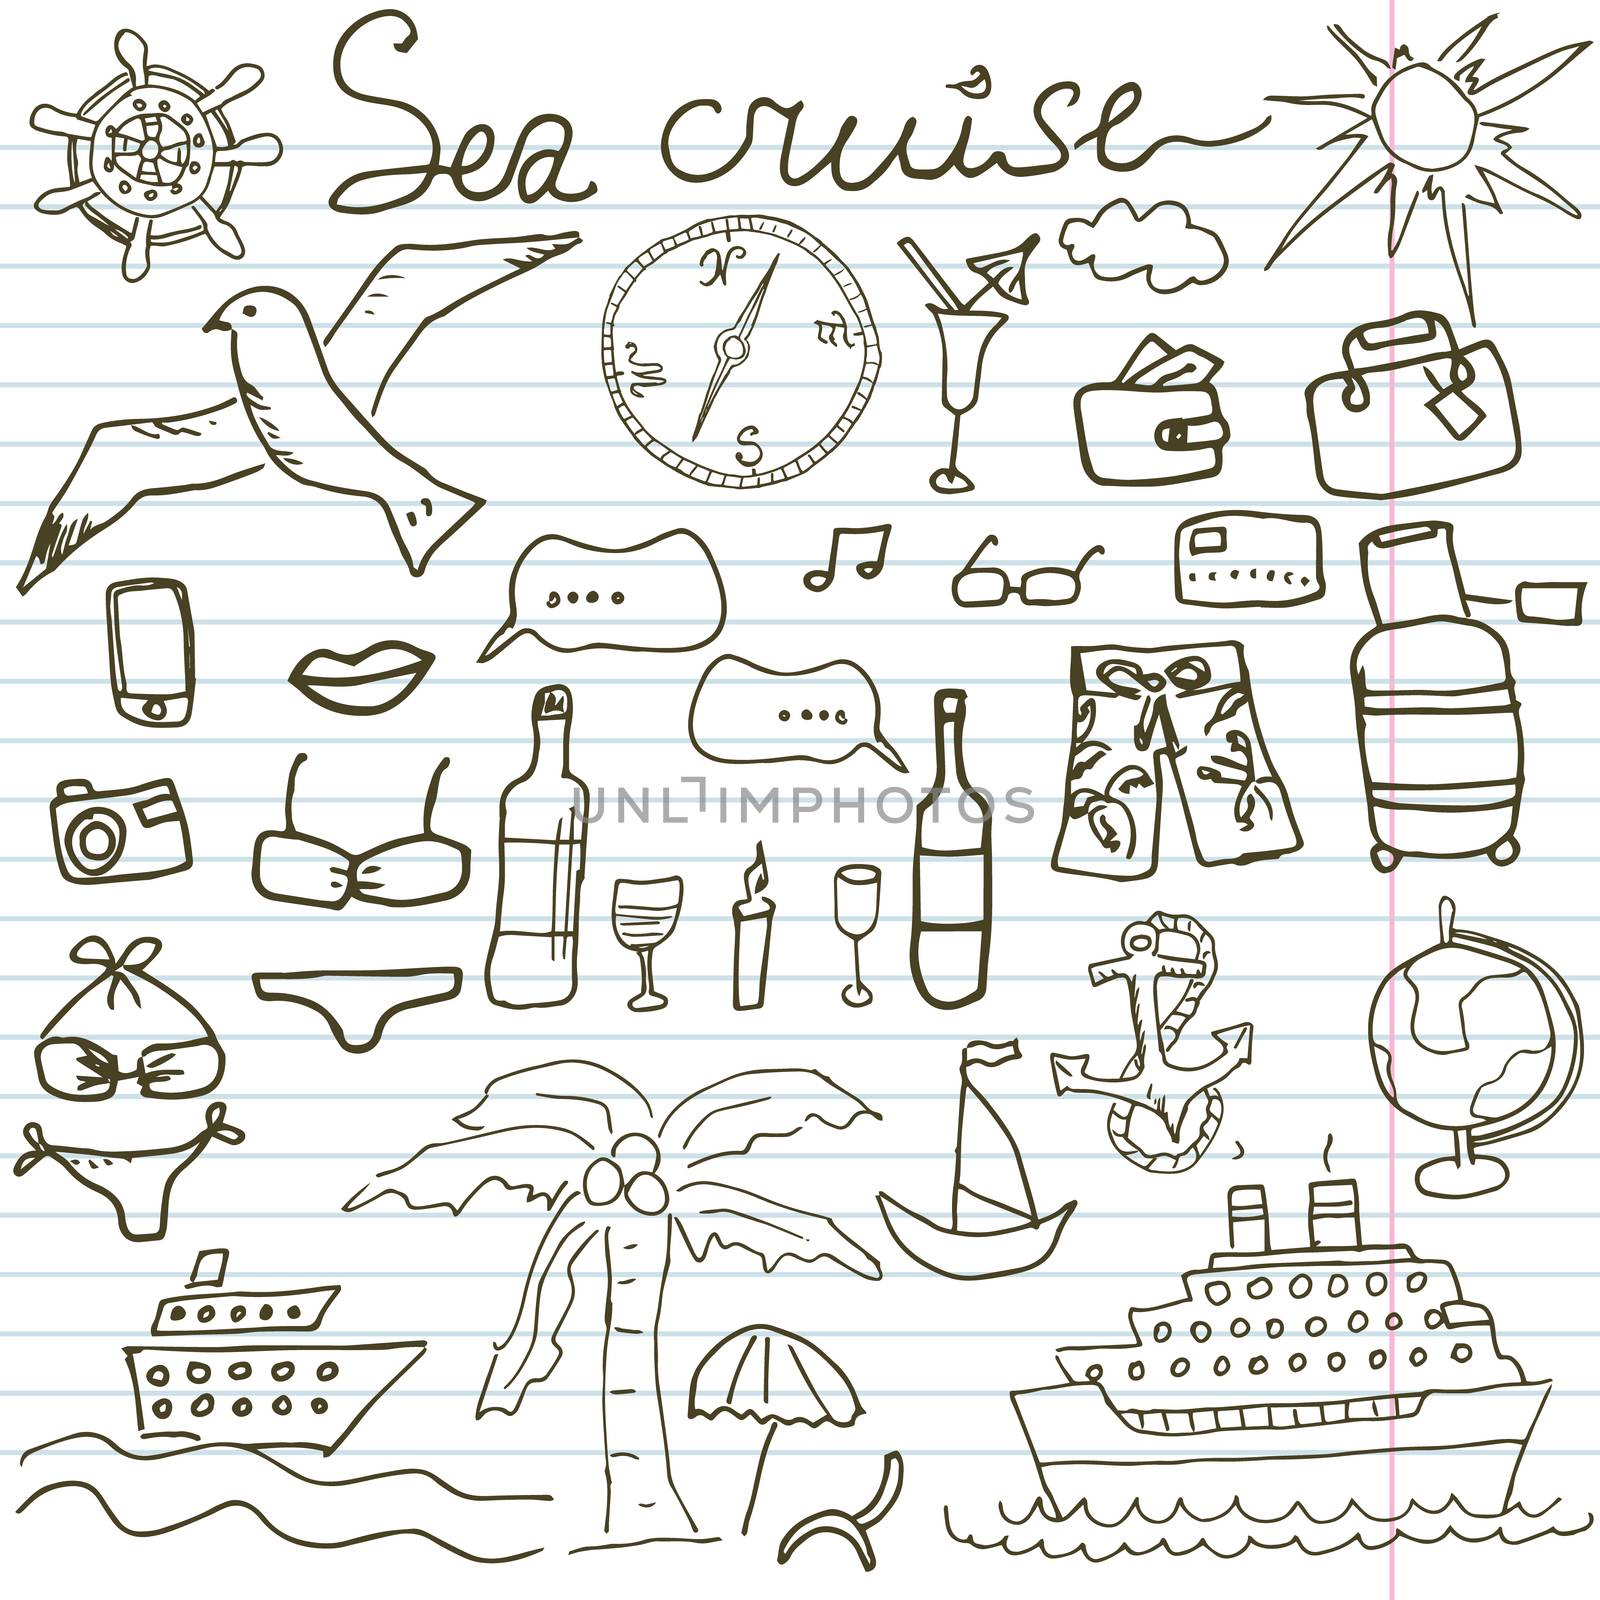 Hand drawn sketch sea cruise doodles vector illustration of Travel and summer elements, on paper notebook.